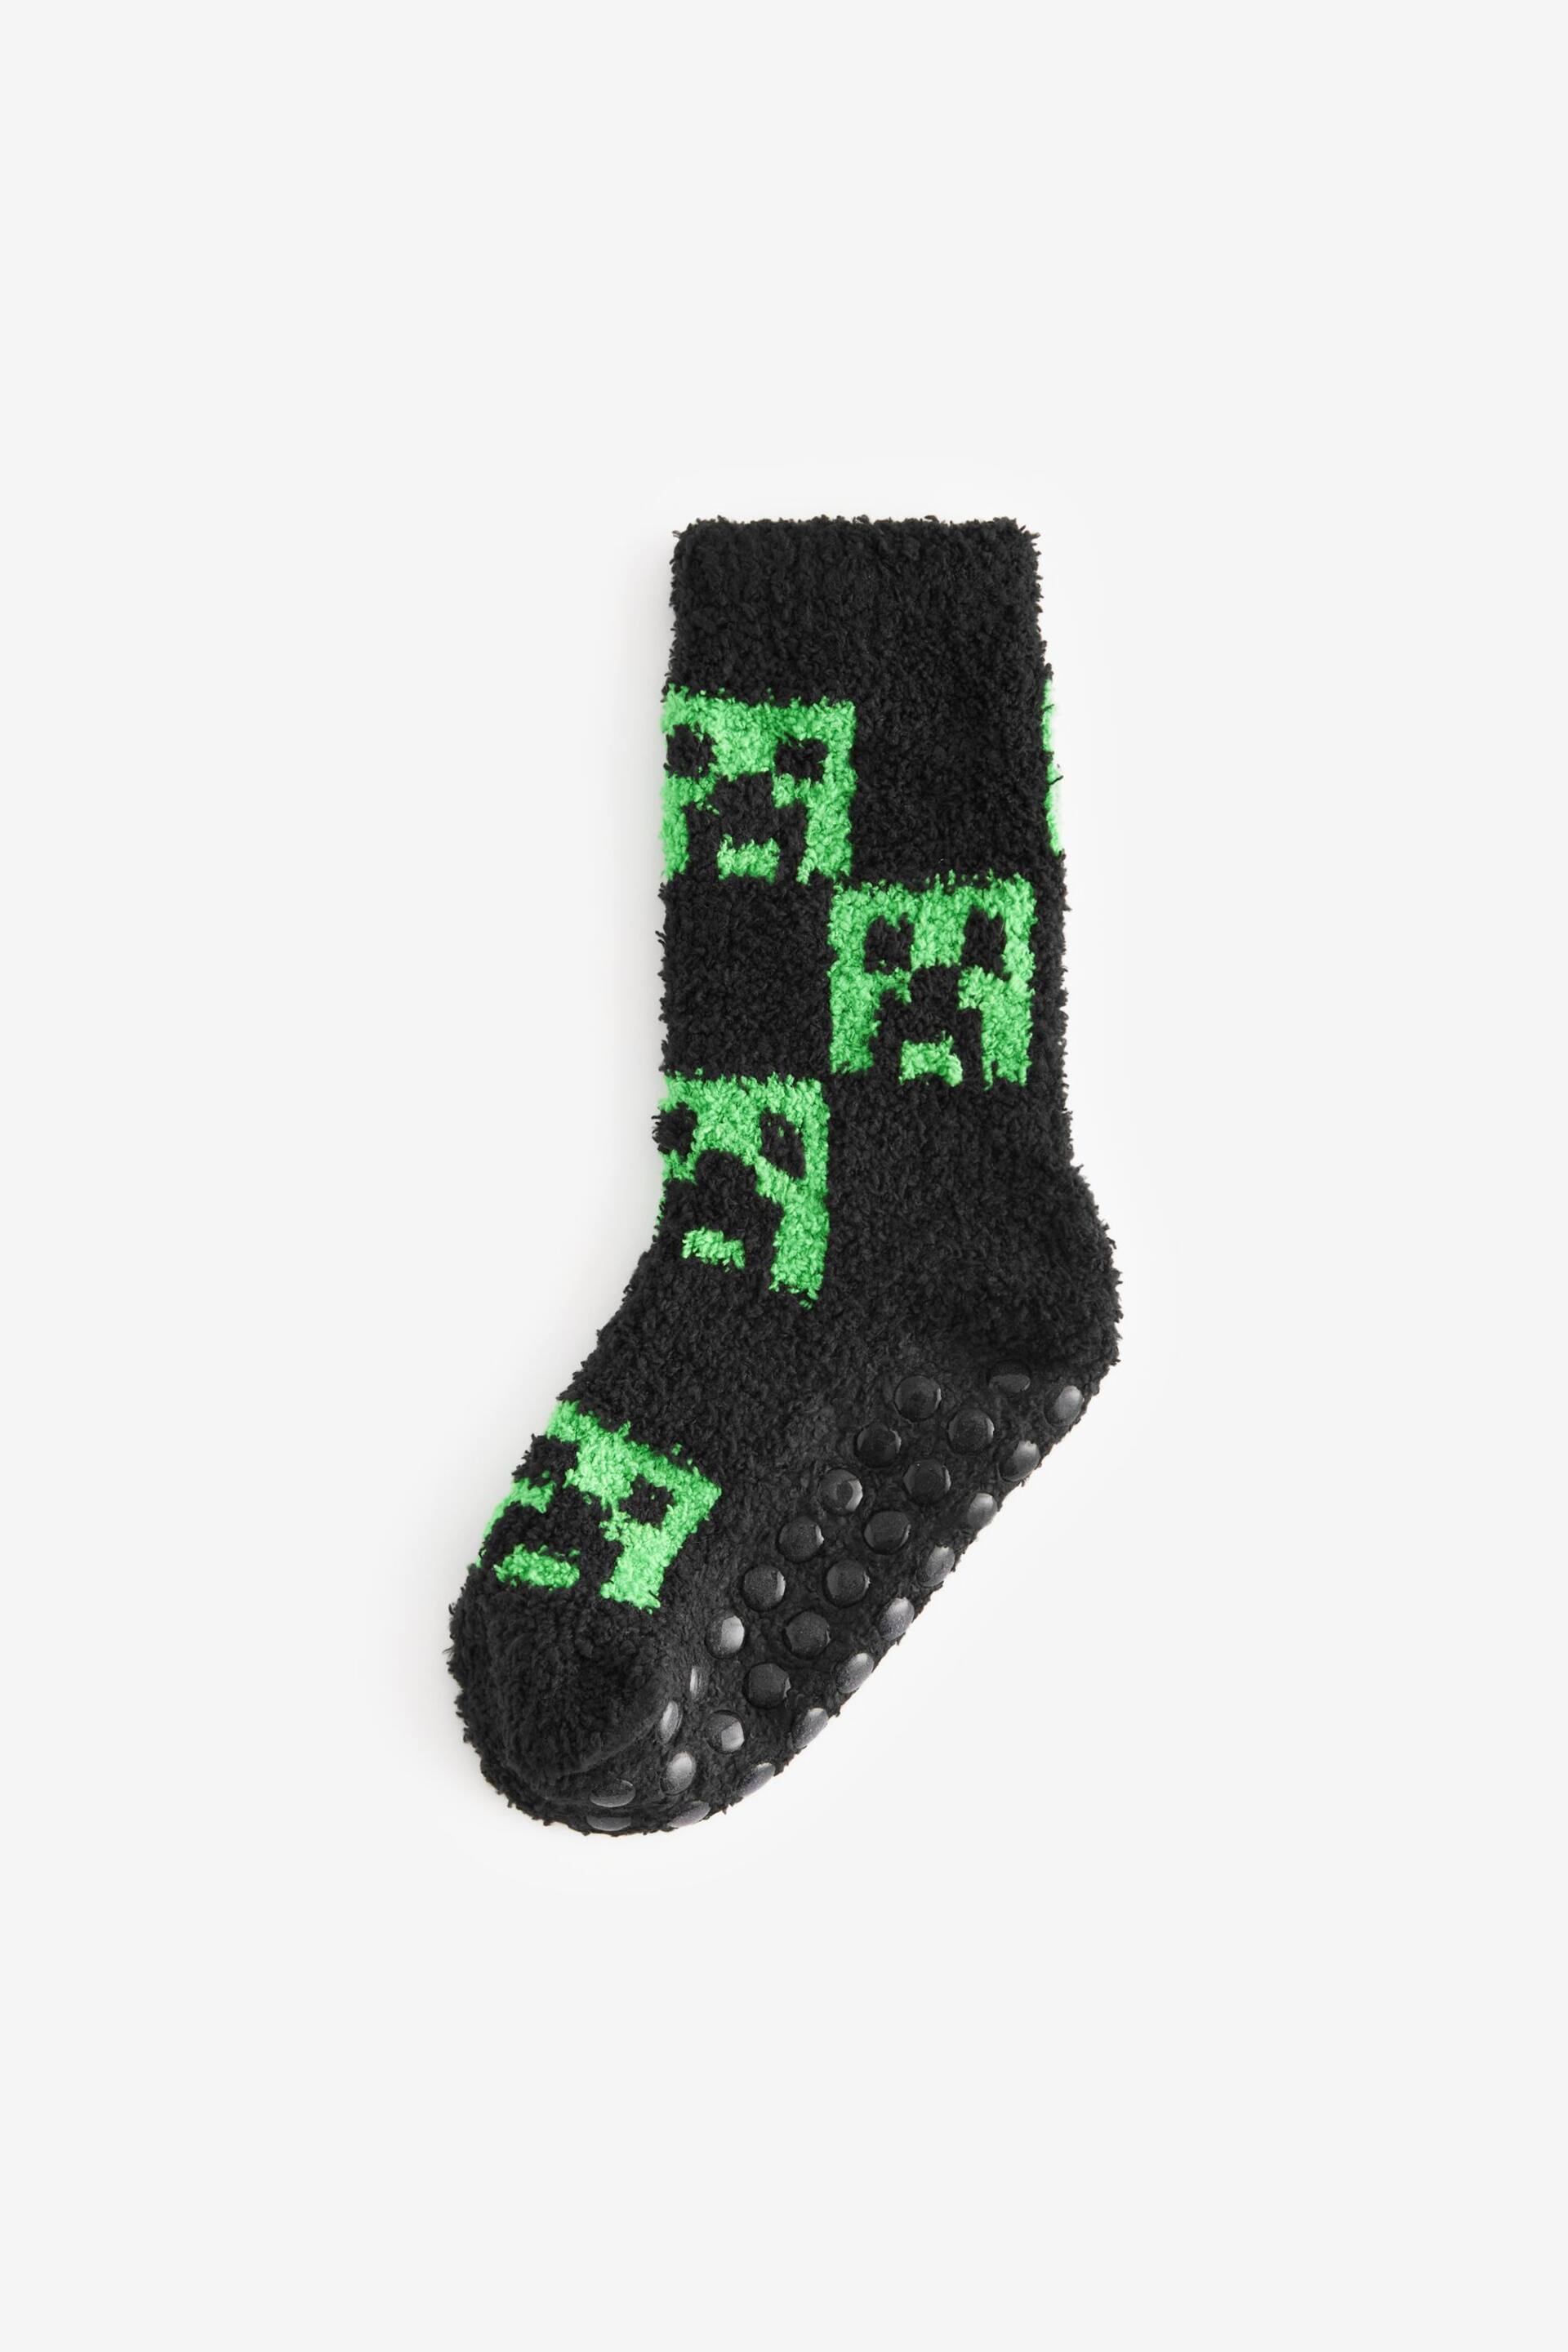 Minecraft Cosy Socks 2 Pack - Image 3 of 3